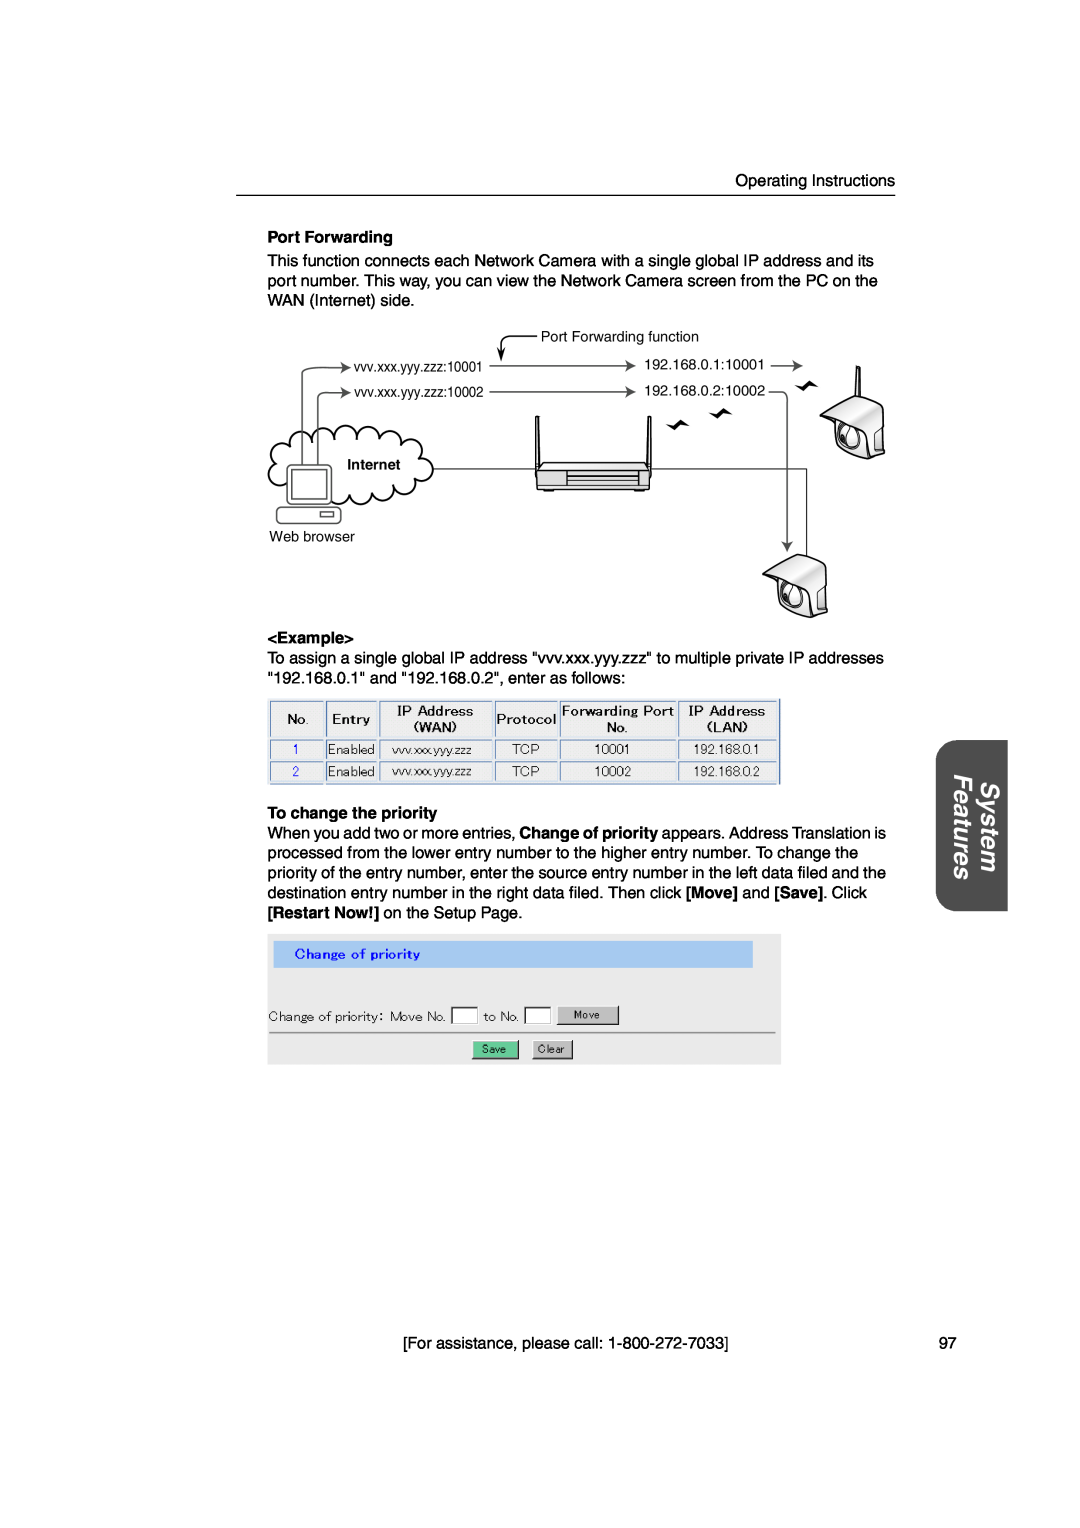 Panasonic KX-HGW600 manual Features, System, Port Forwarding, Example, To change the priority 